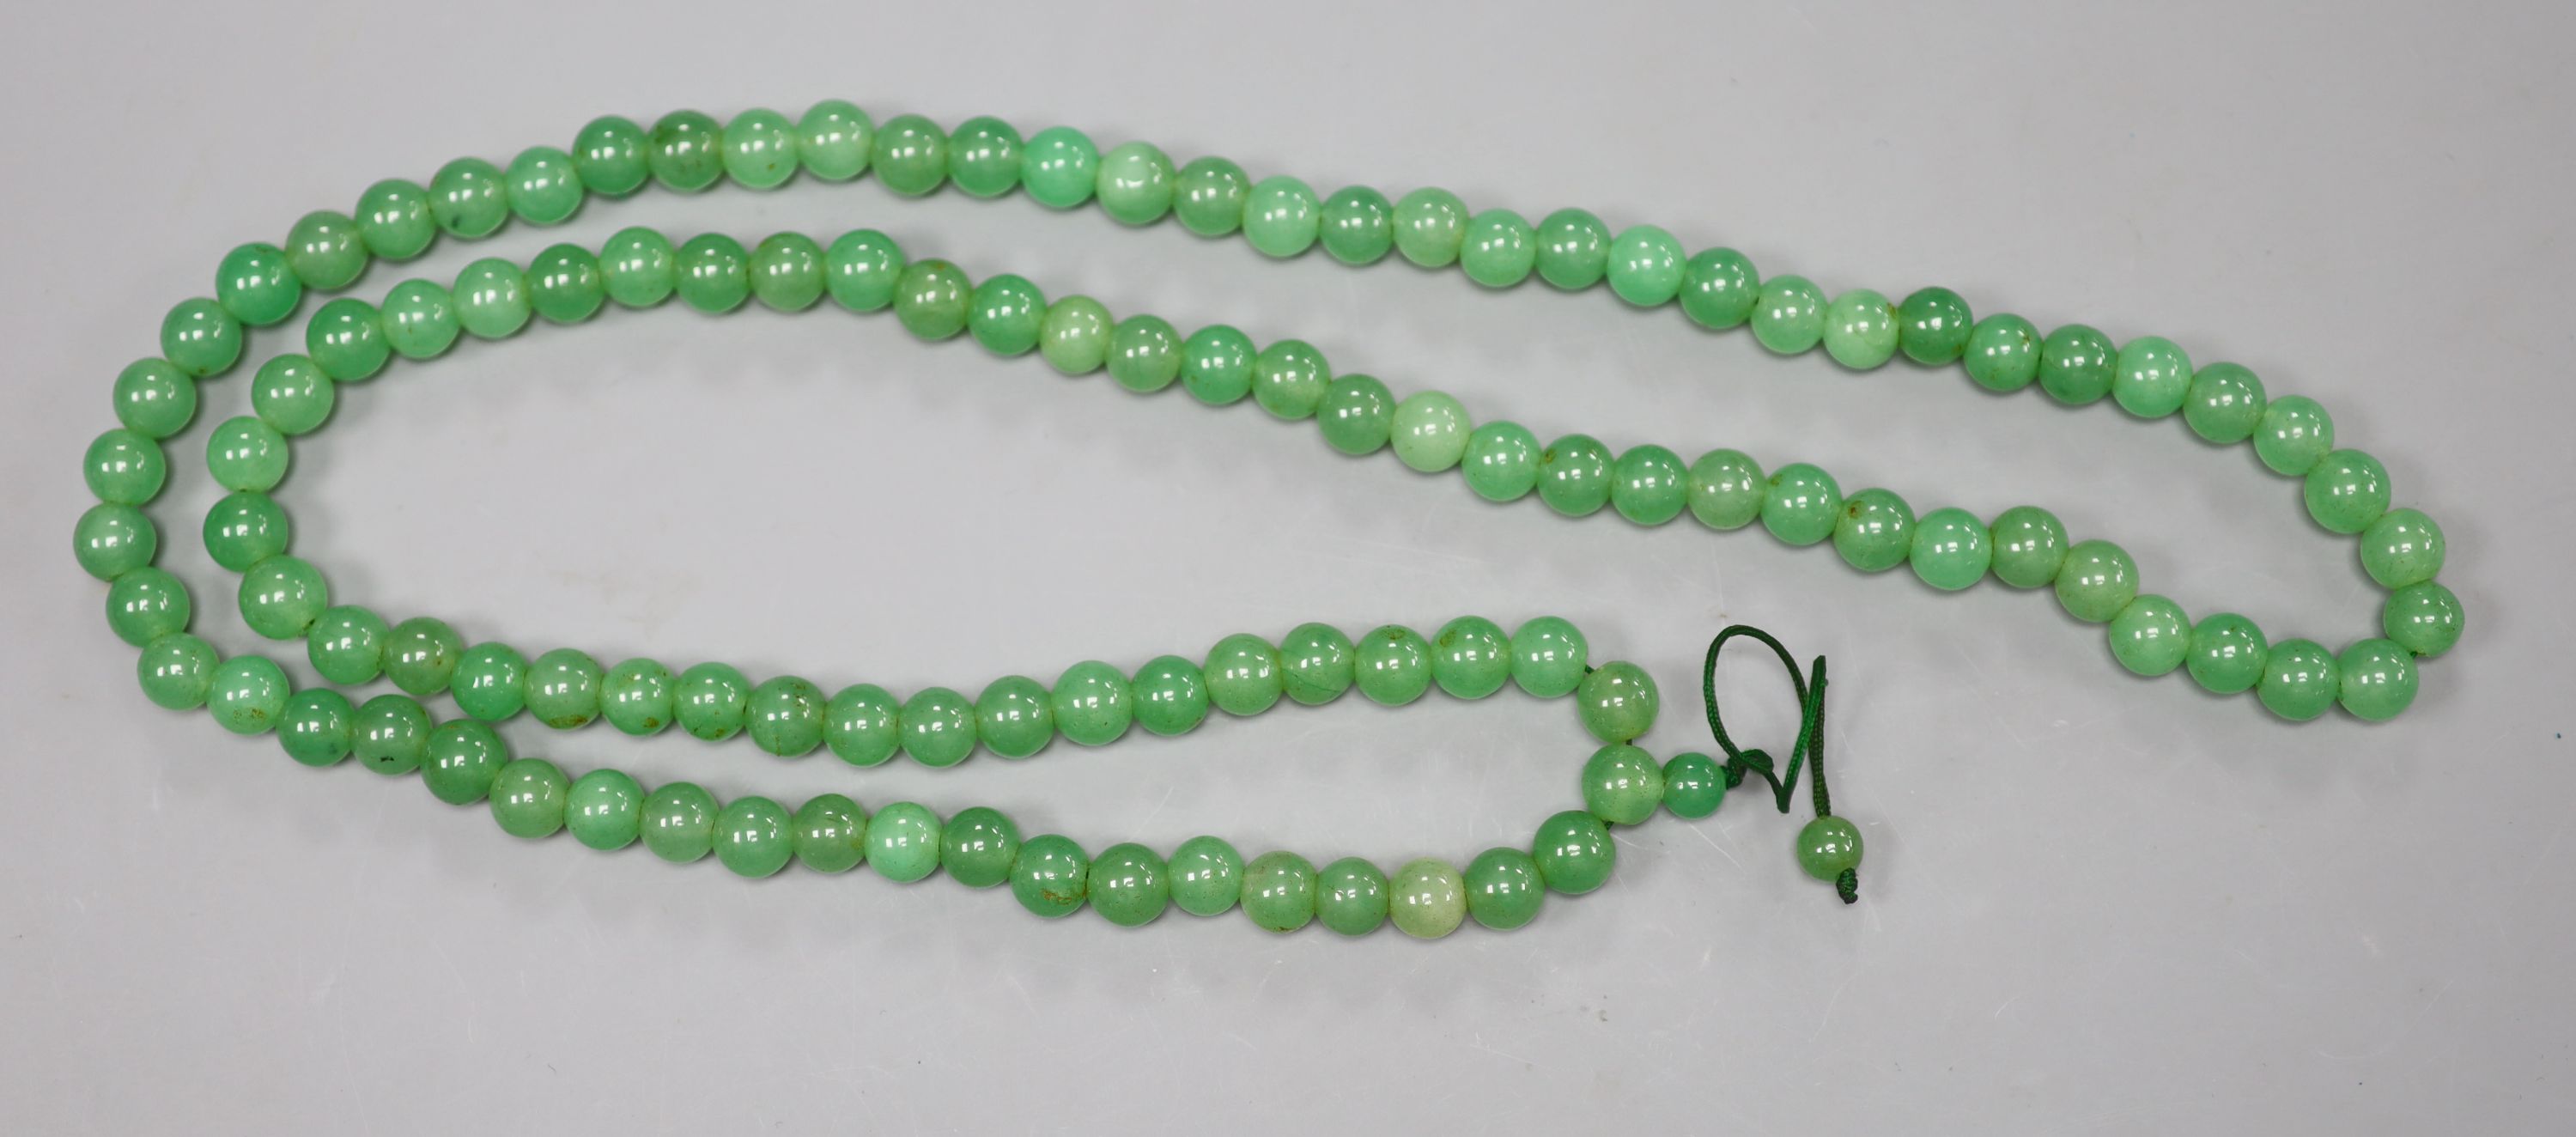 A simulated jade bead necklace, 101cm. - Image 2 of 2